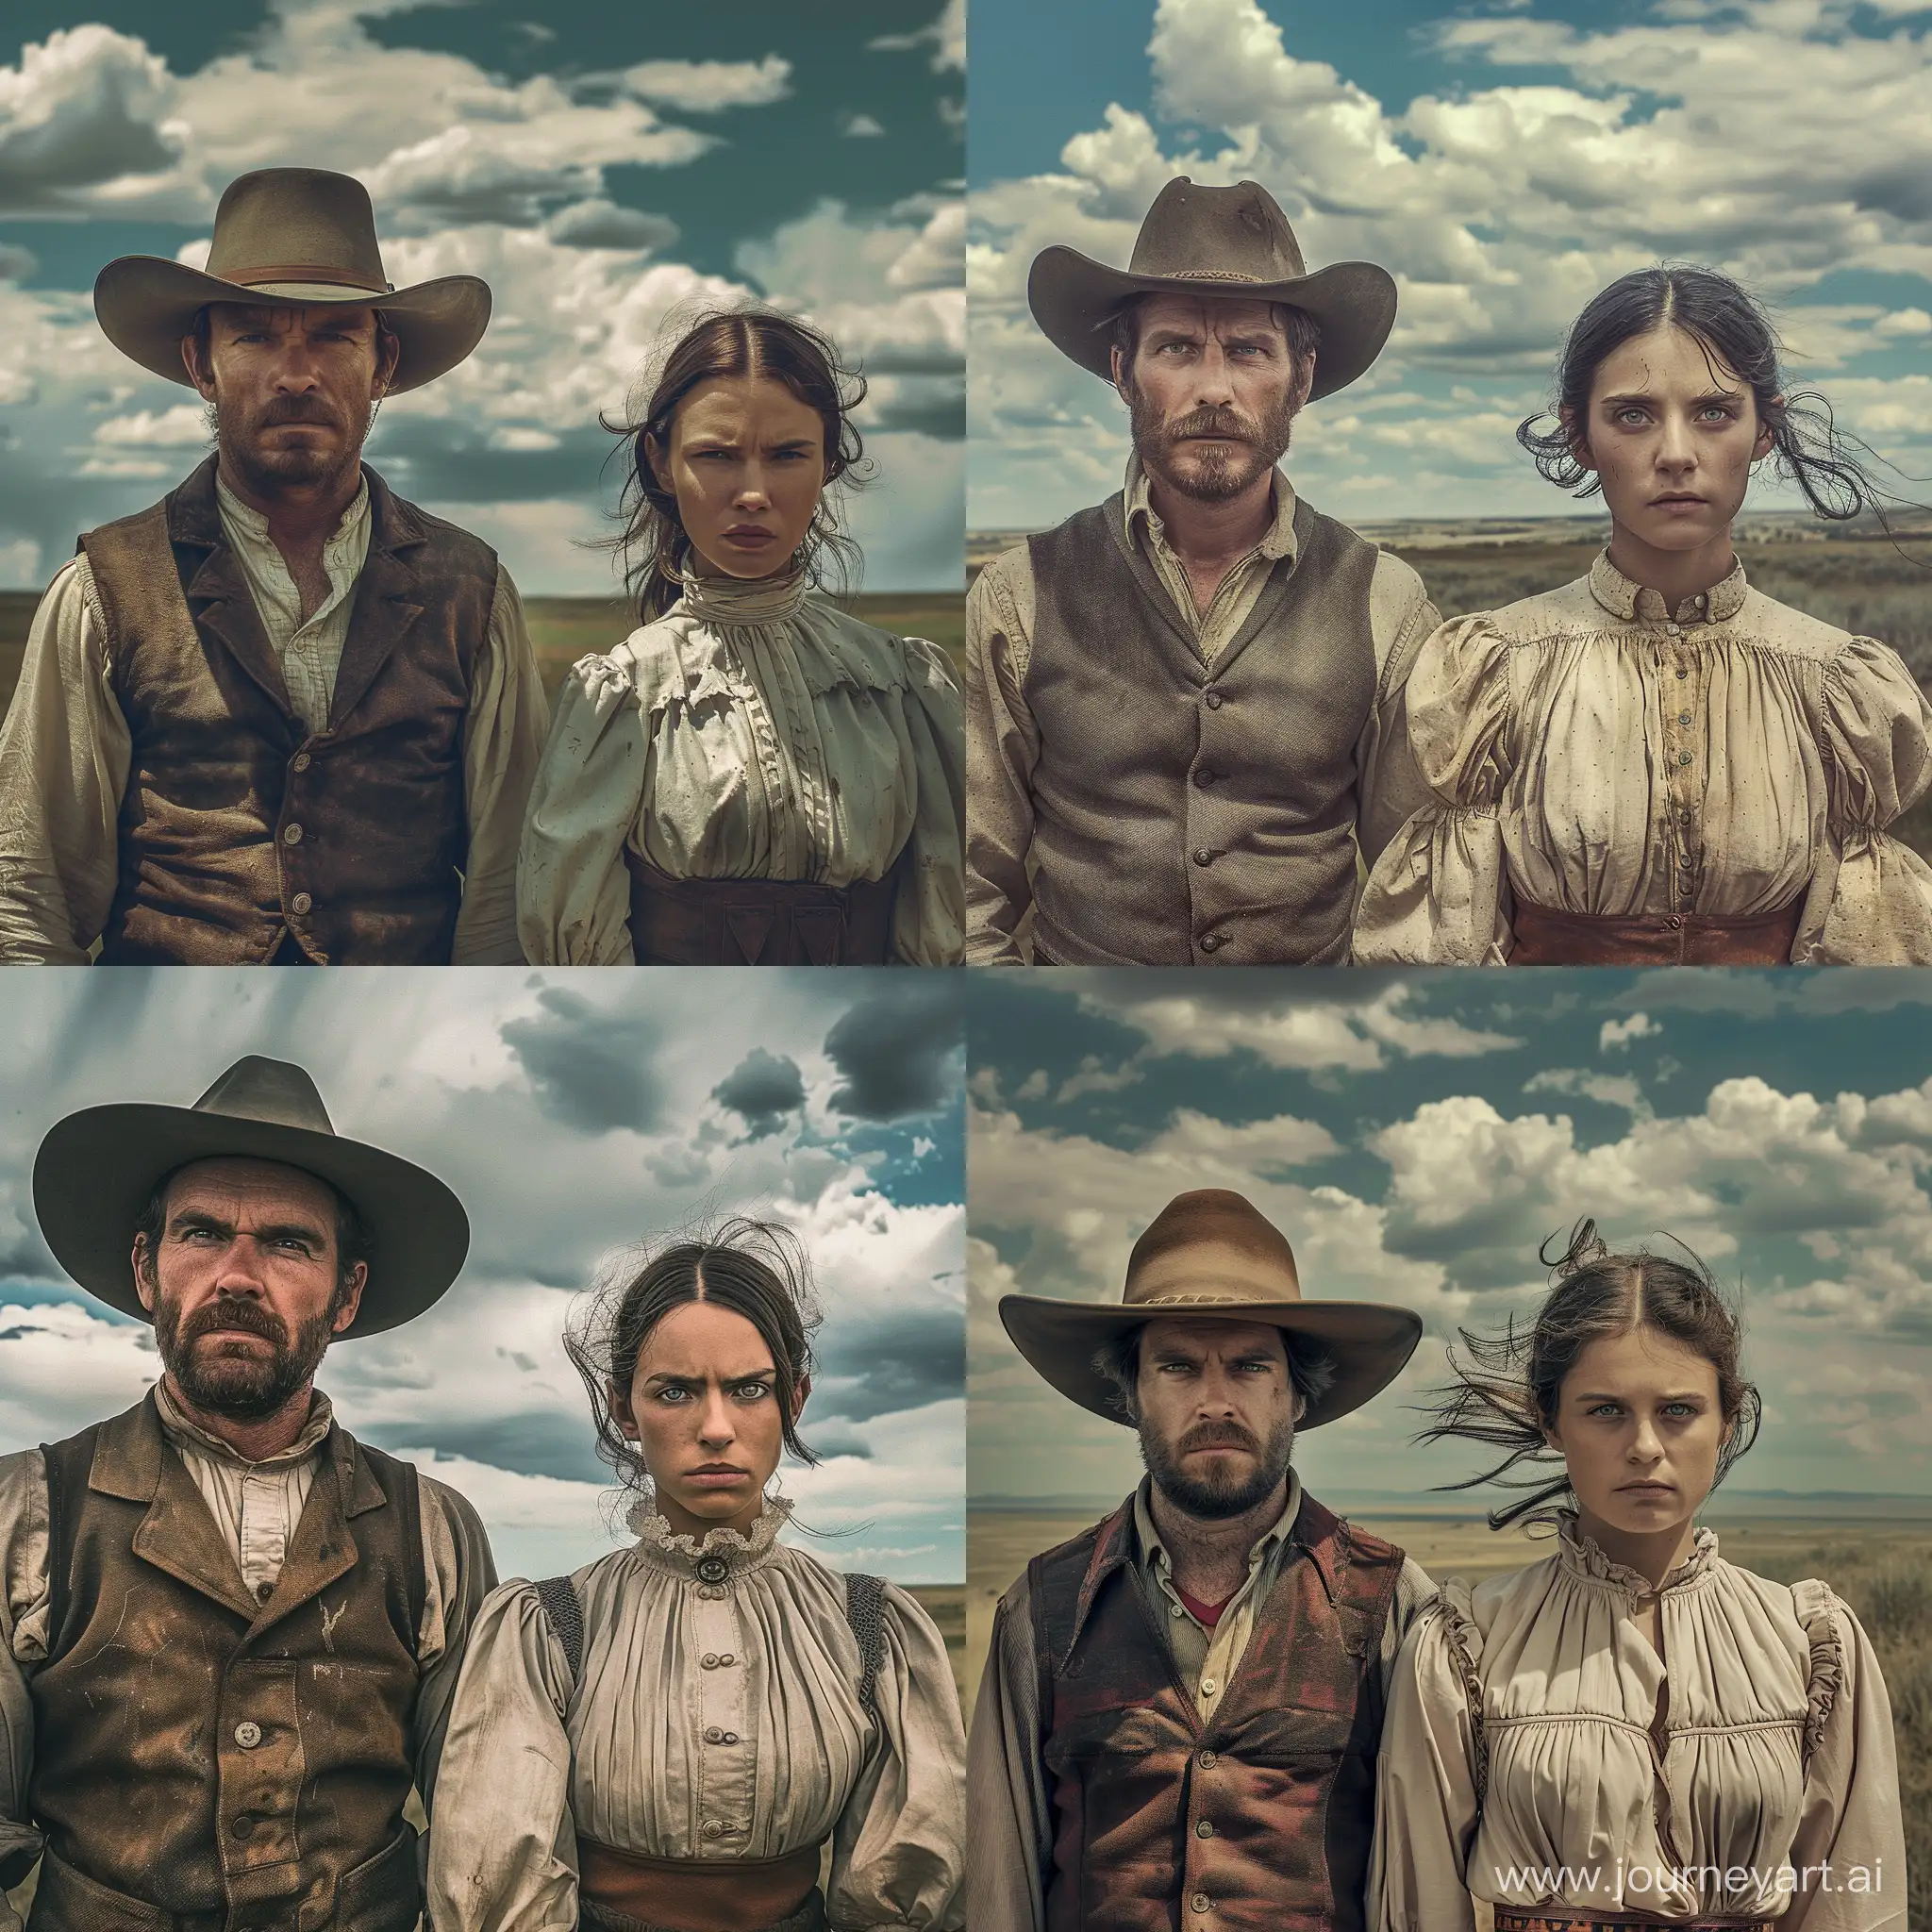 Pioneering-Couple-in-the-American-West-Gritty-Frontier-Realities